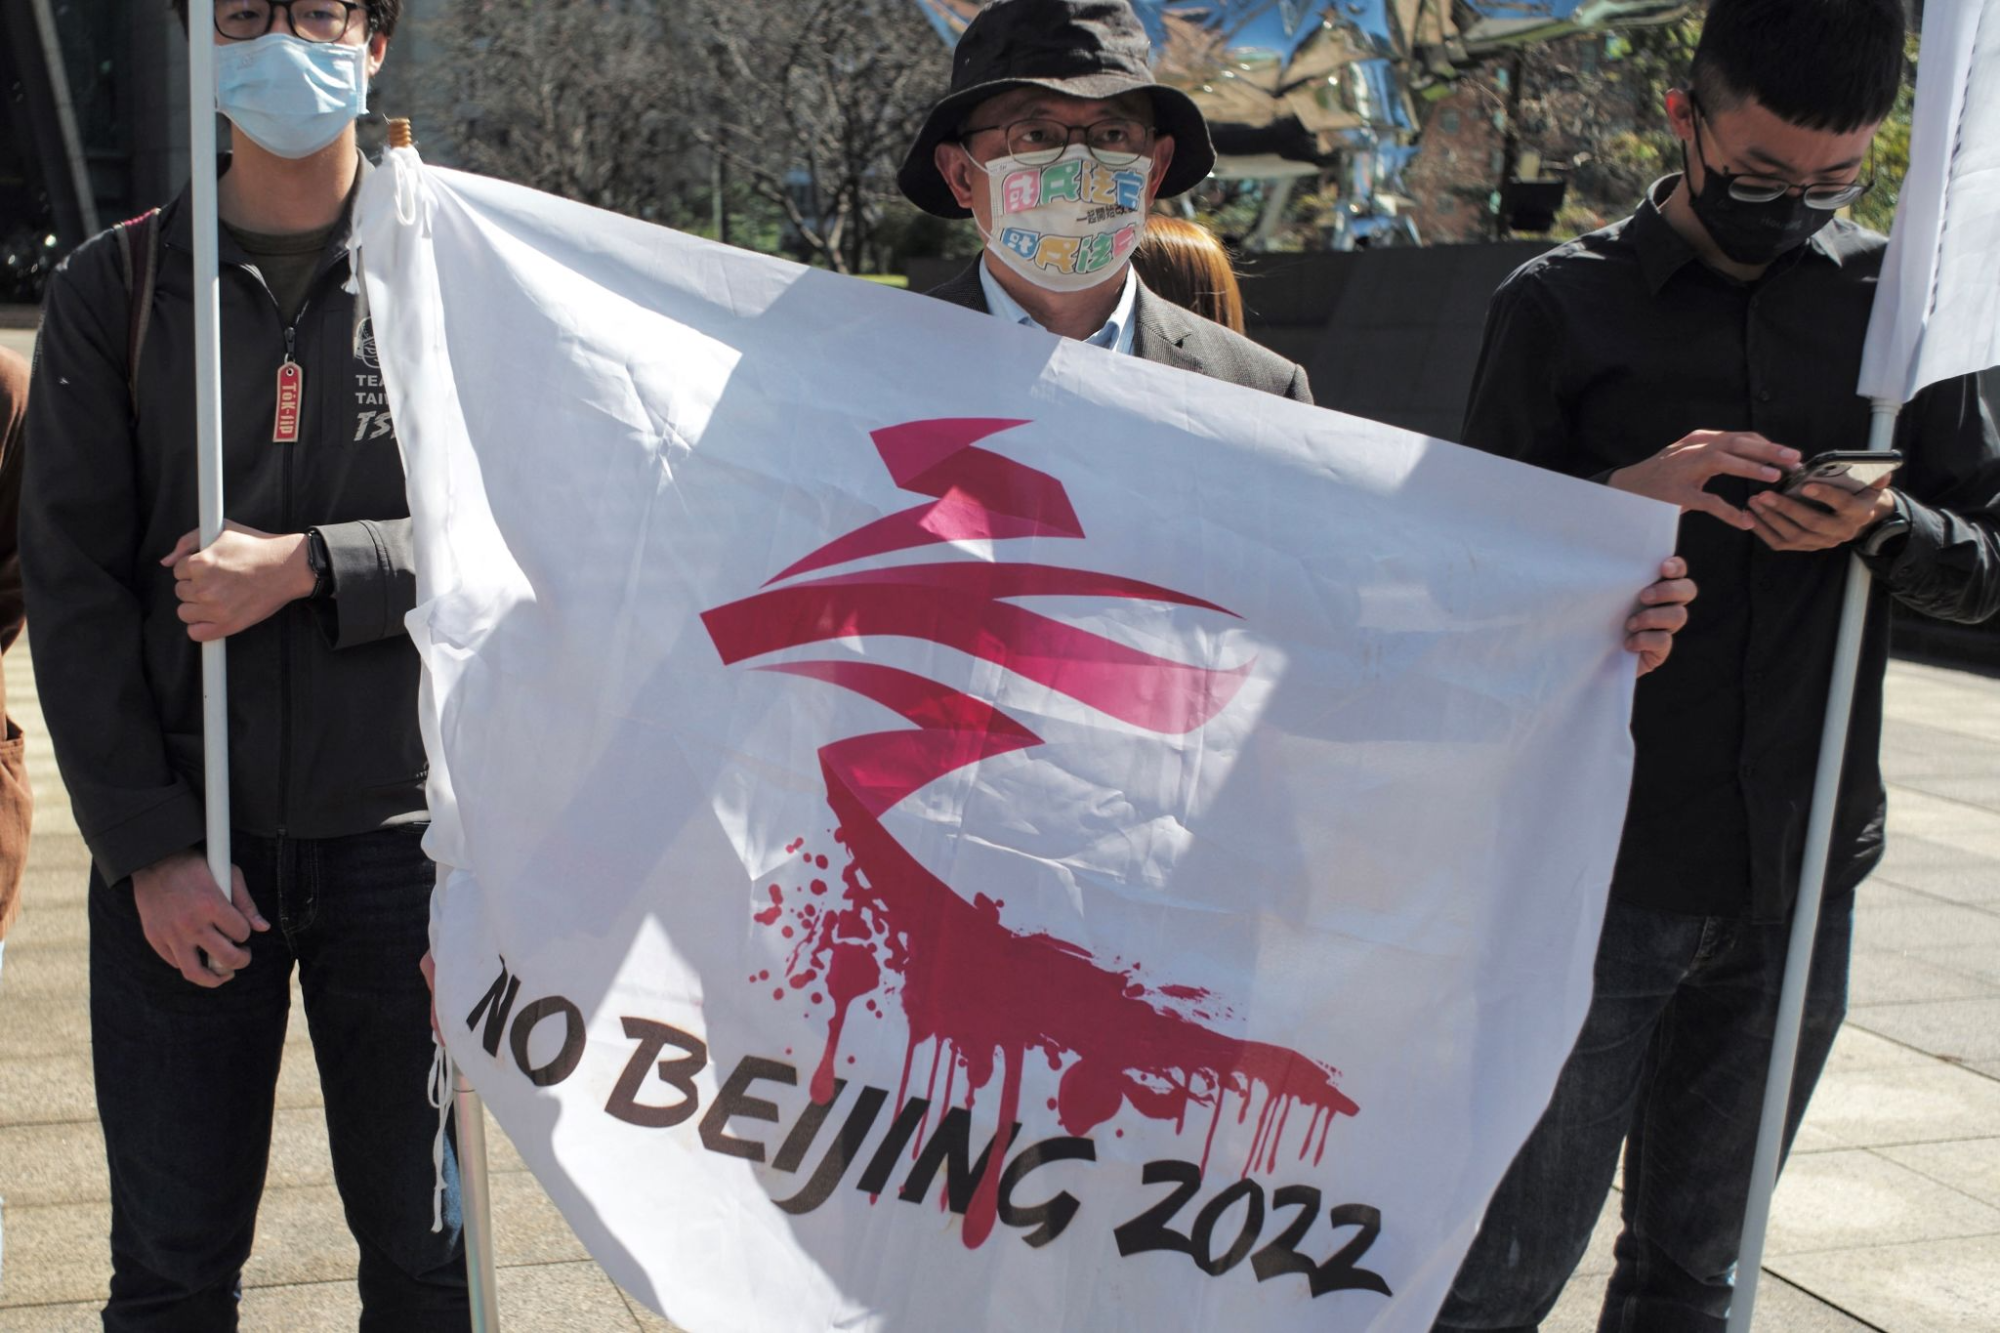 A protestor holds a flag during a demonstration against the Beijing Olympics in Taipei, Taiwan, on Wednesday.